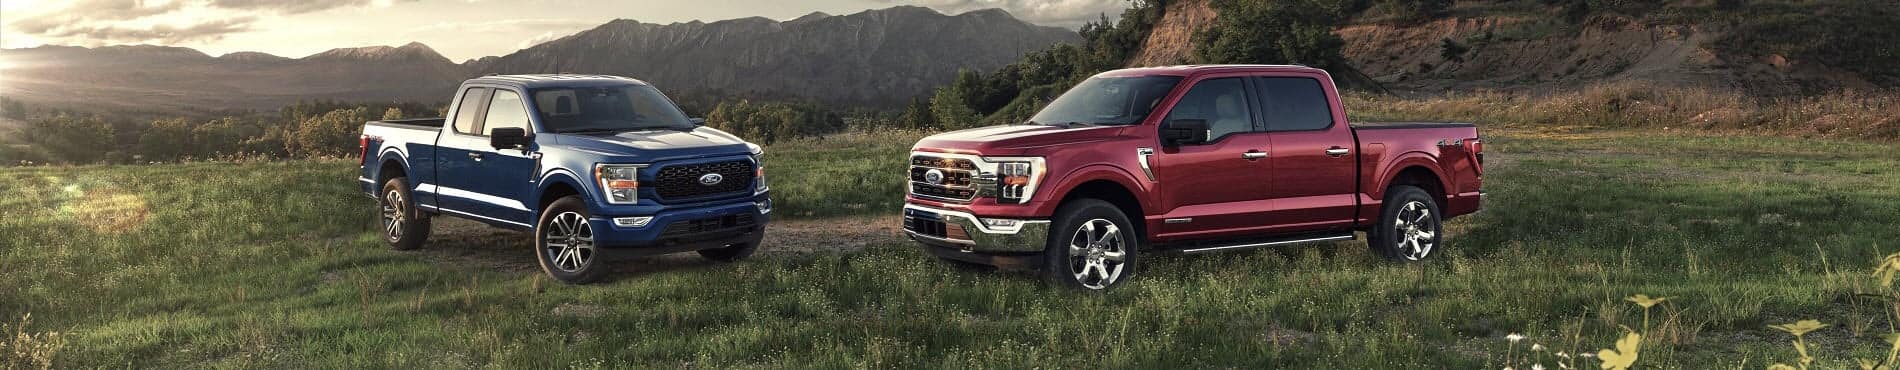 2021_Ford_F-150_7_small_banner